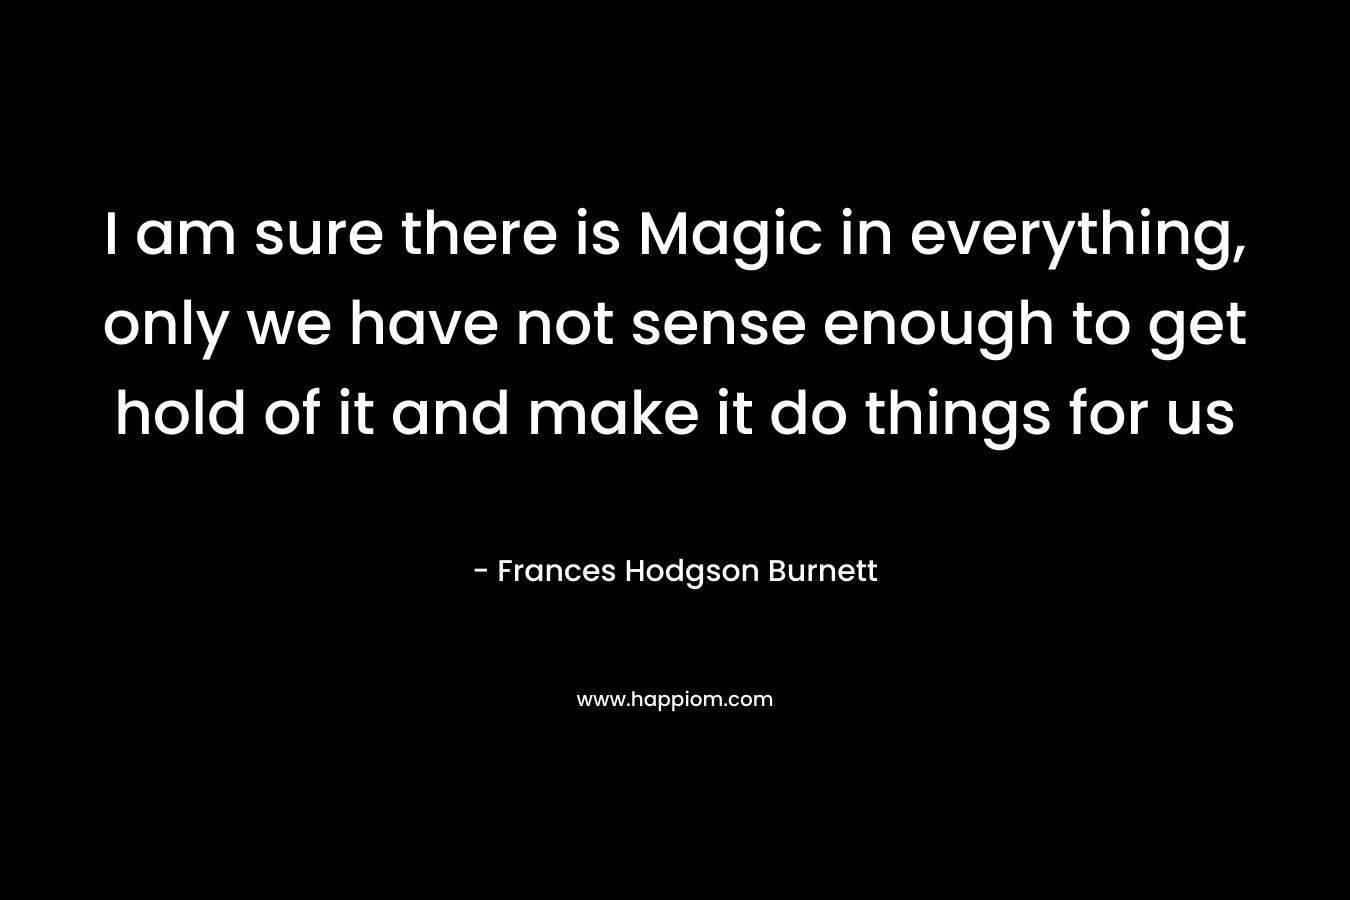 I am sure there is Magic in everything, only we have not sense enough to get hold of it and make it do things for us – Frances Hodgson Burnett